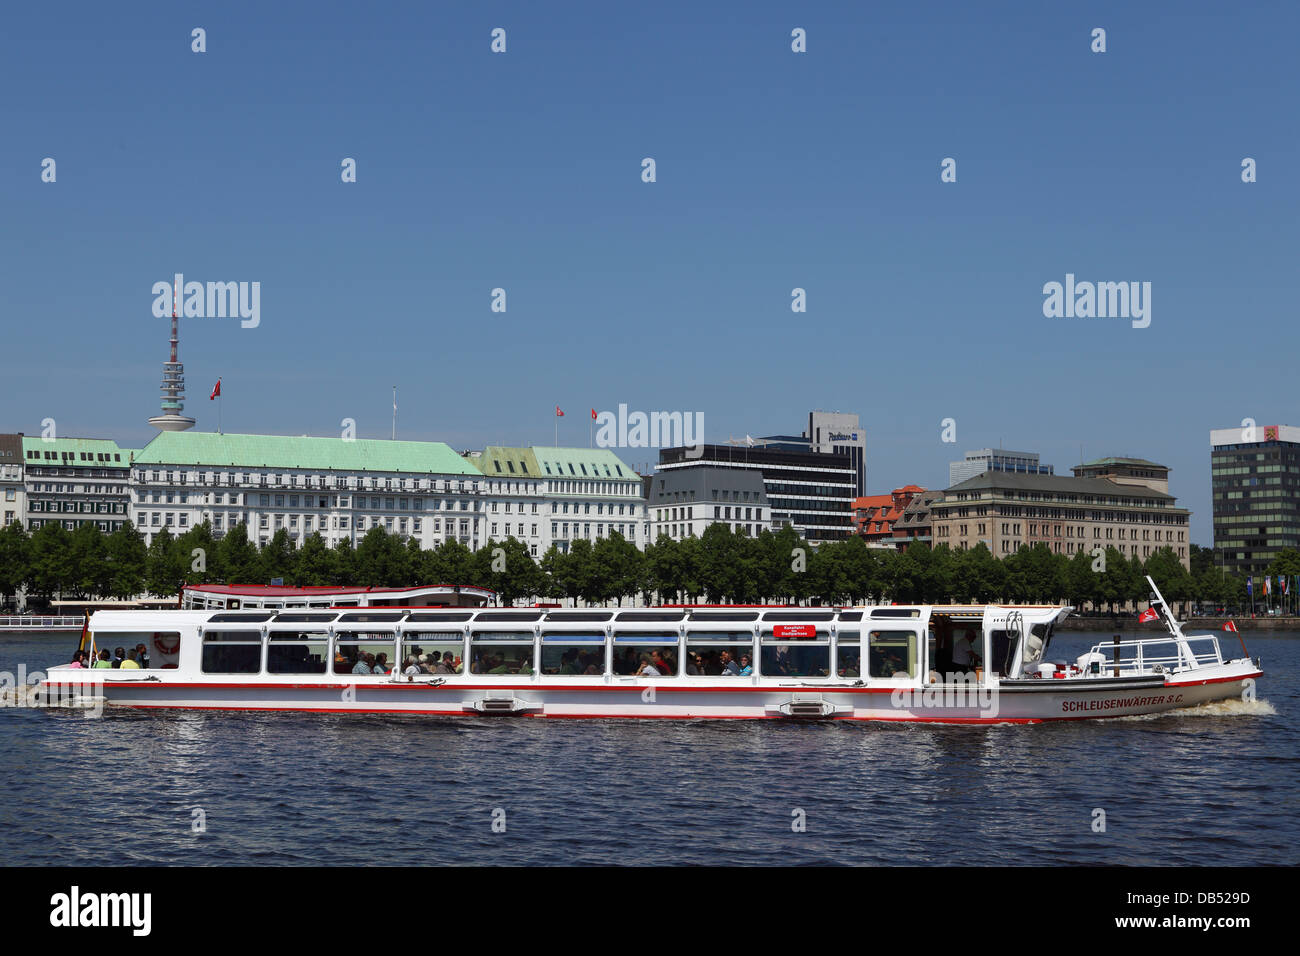 A boat cruises on the Inner Alster lake (Innenalster) in Hamburg, Germany. Stock Photo